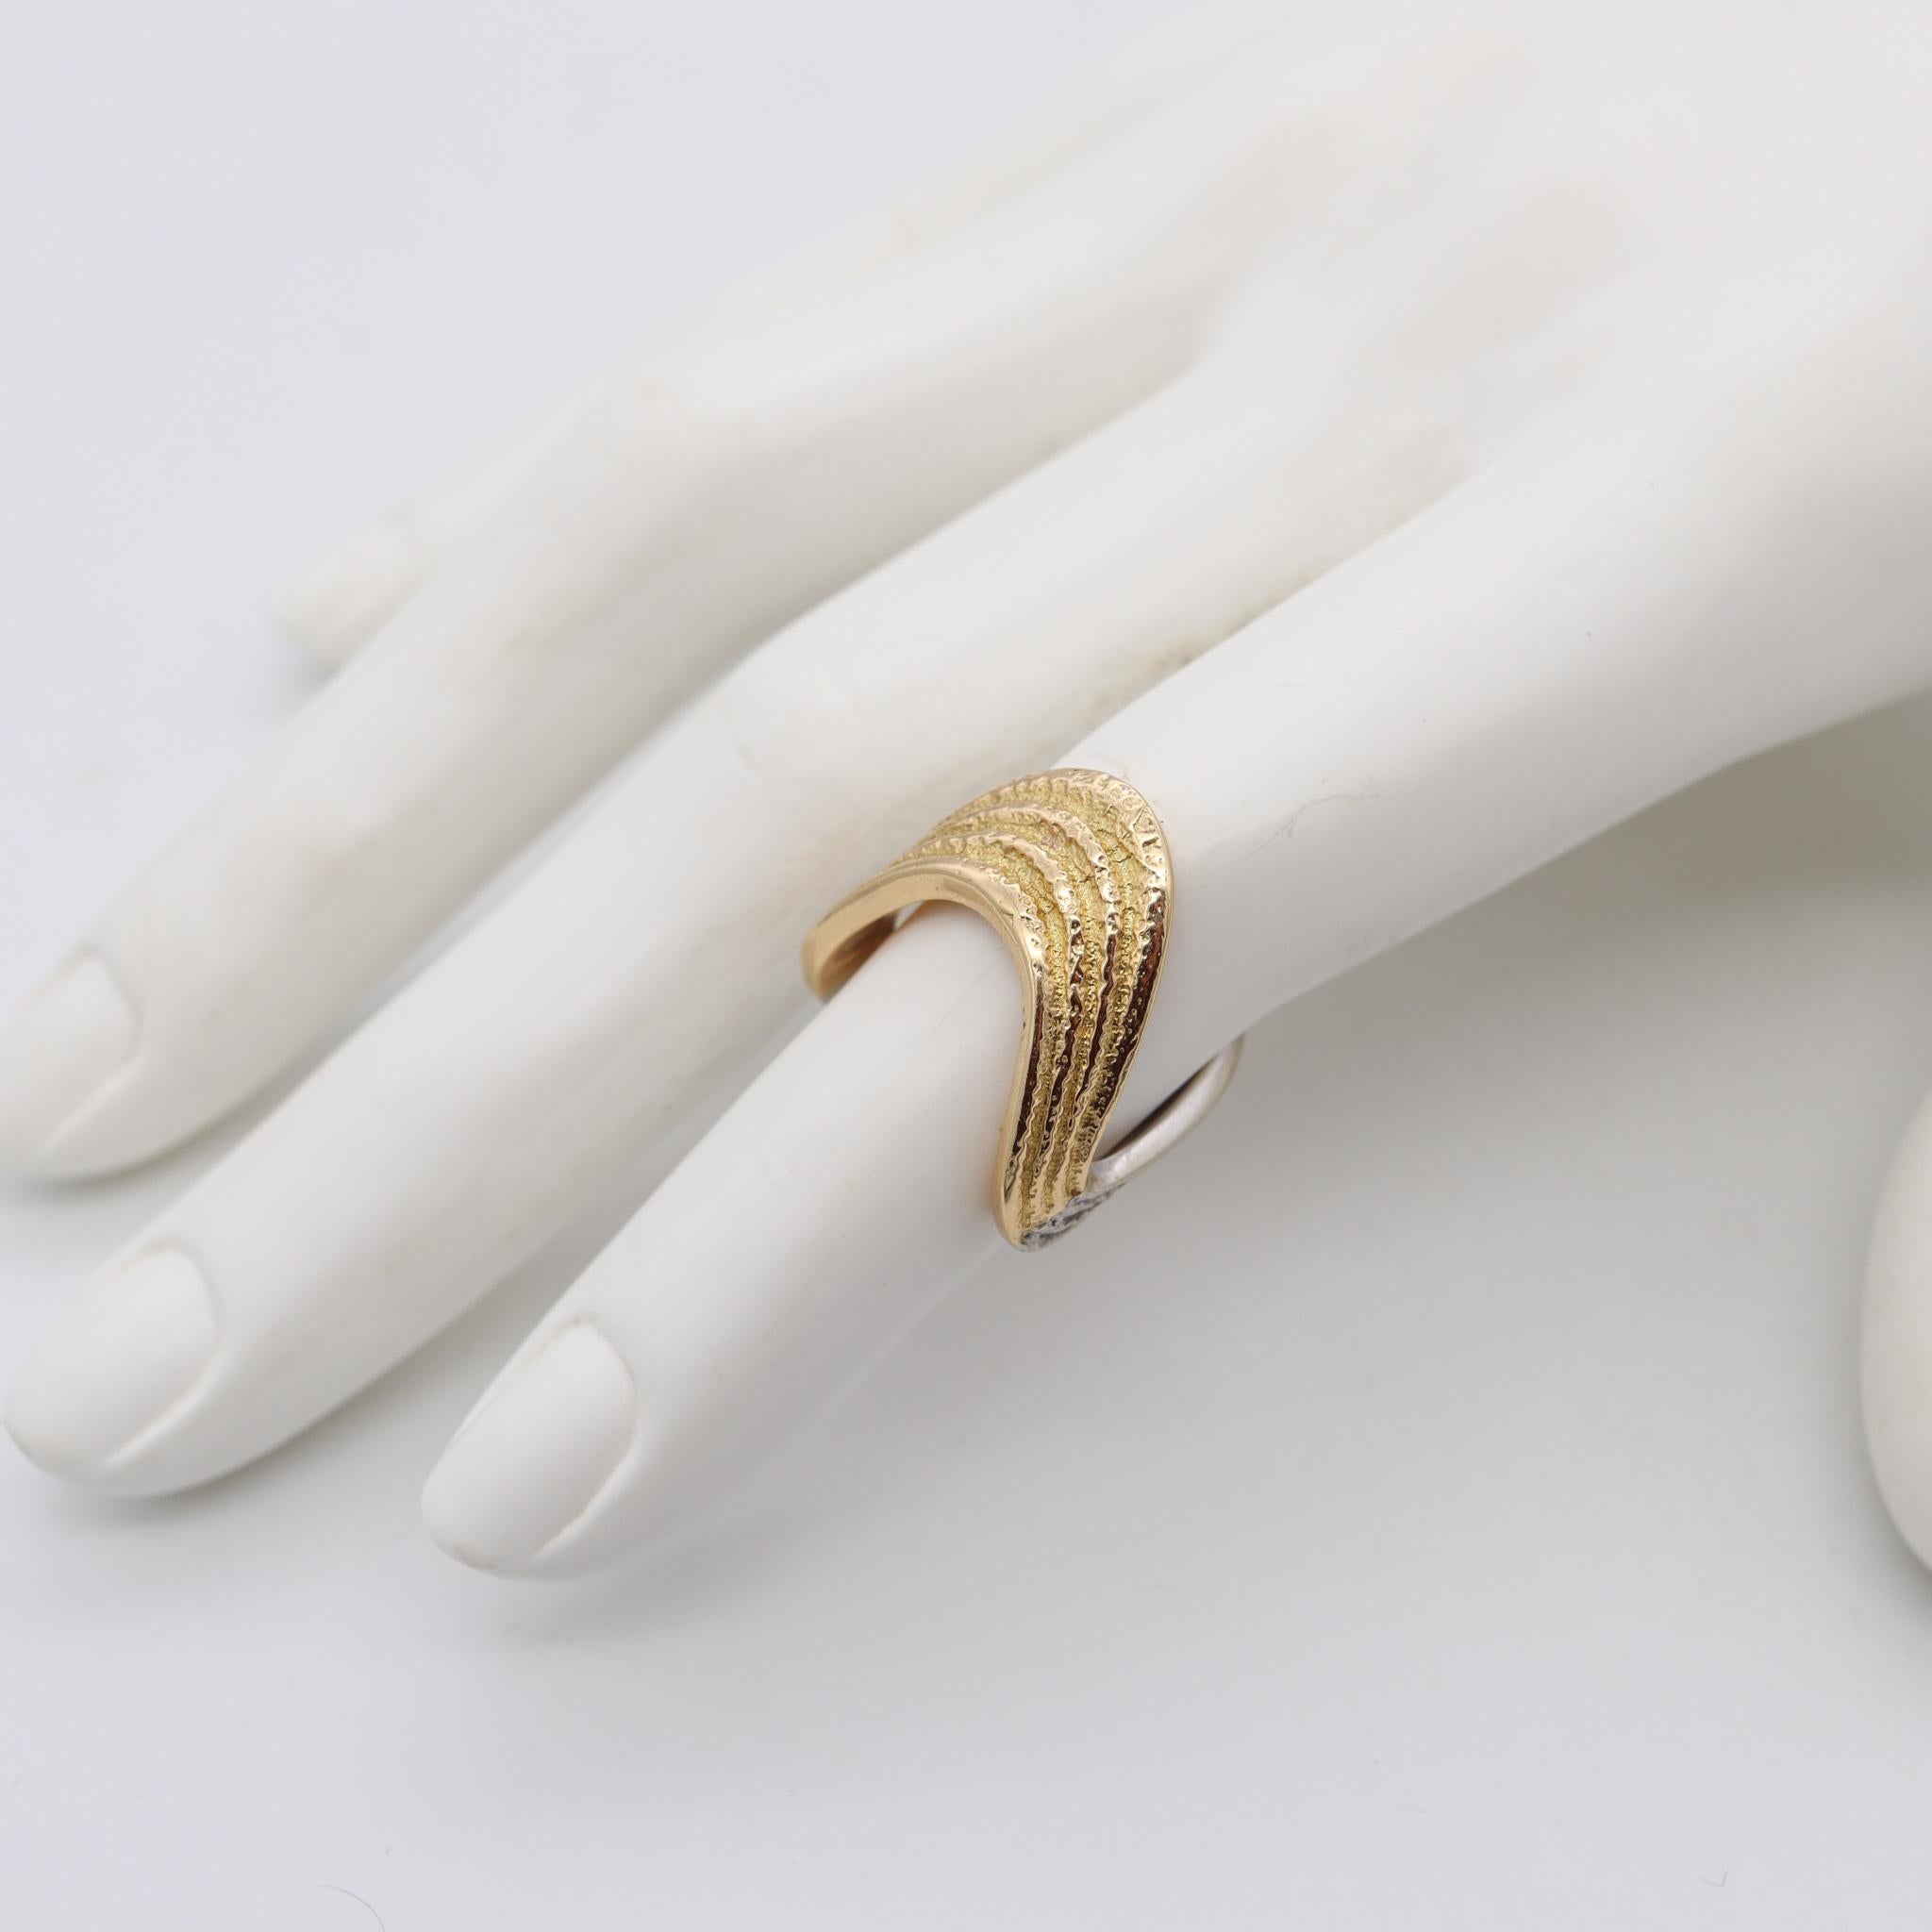 Rare geometric Ring designed by Bvlgari.

A very rare collector's piece, created in Roma Italy by the house of Bvlgari, back in the 1970's. This sculptural ring has been crafted in a V shape in two tones of 18 karats gold, with textured